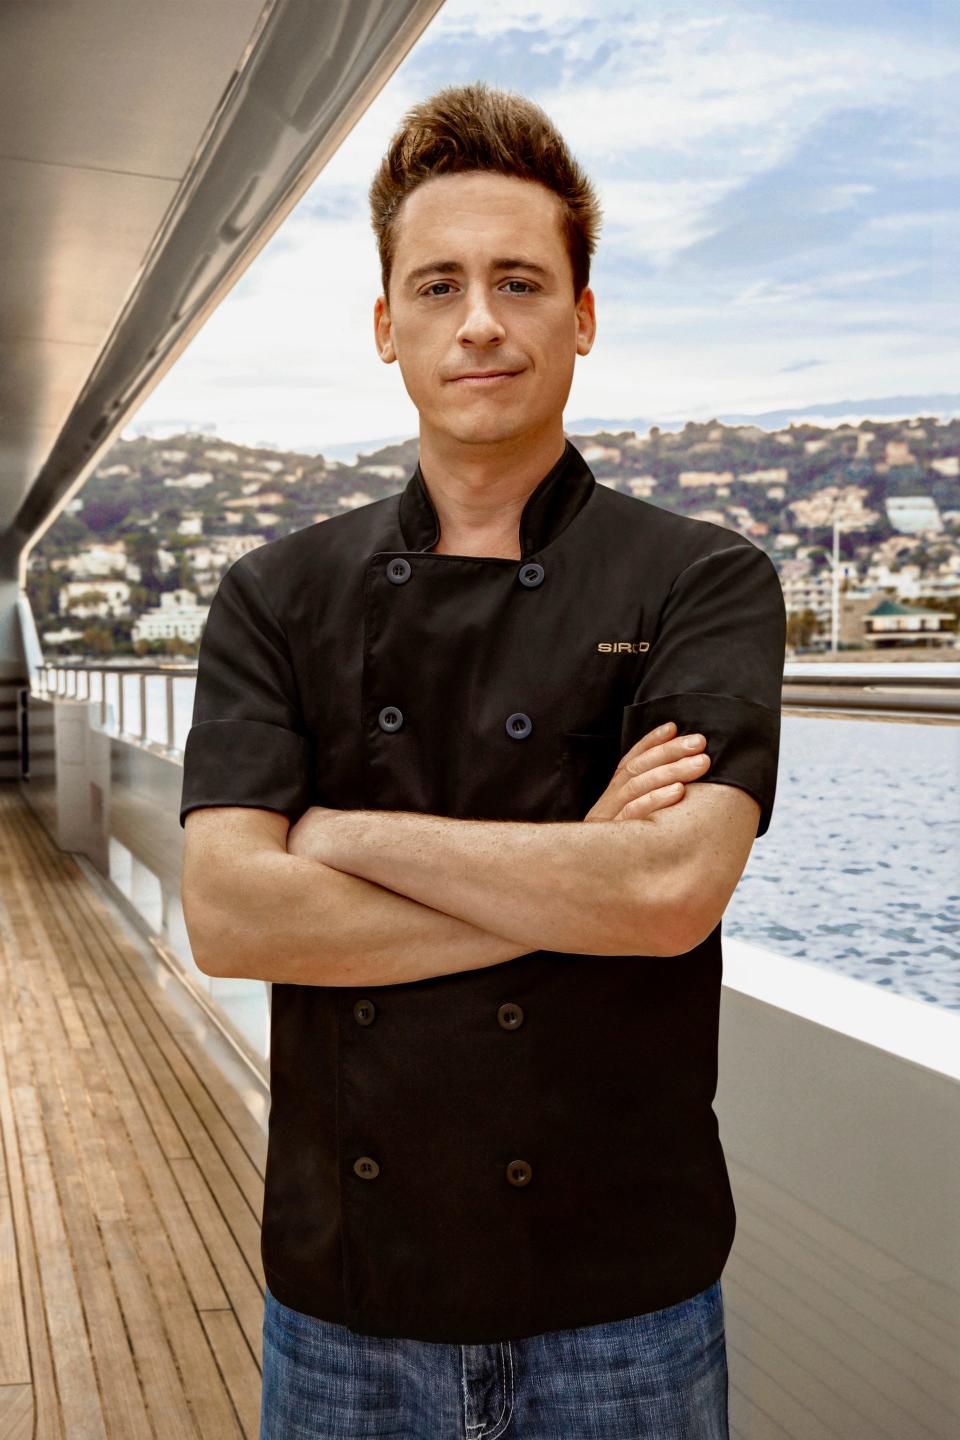 Chef Ben Robinson, who stars on the Bravo TV series "Below Deck," will headline a sold-out dinner event at the 2022 Palm Beach Food and Wine Festival.